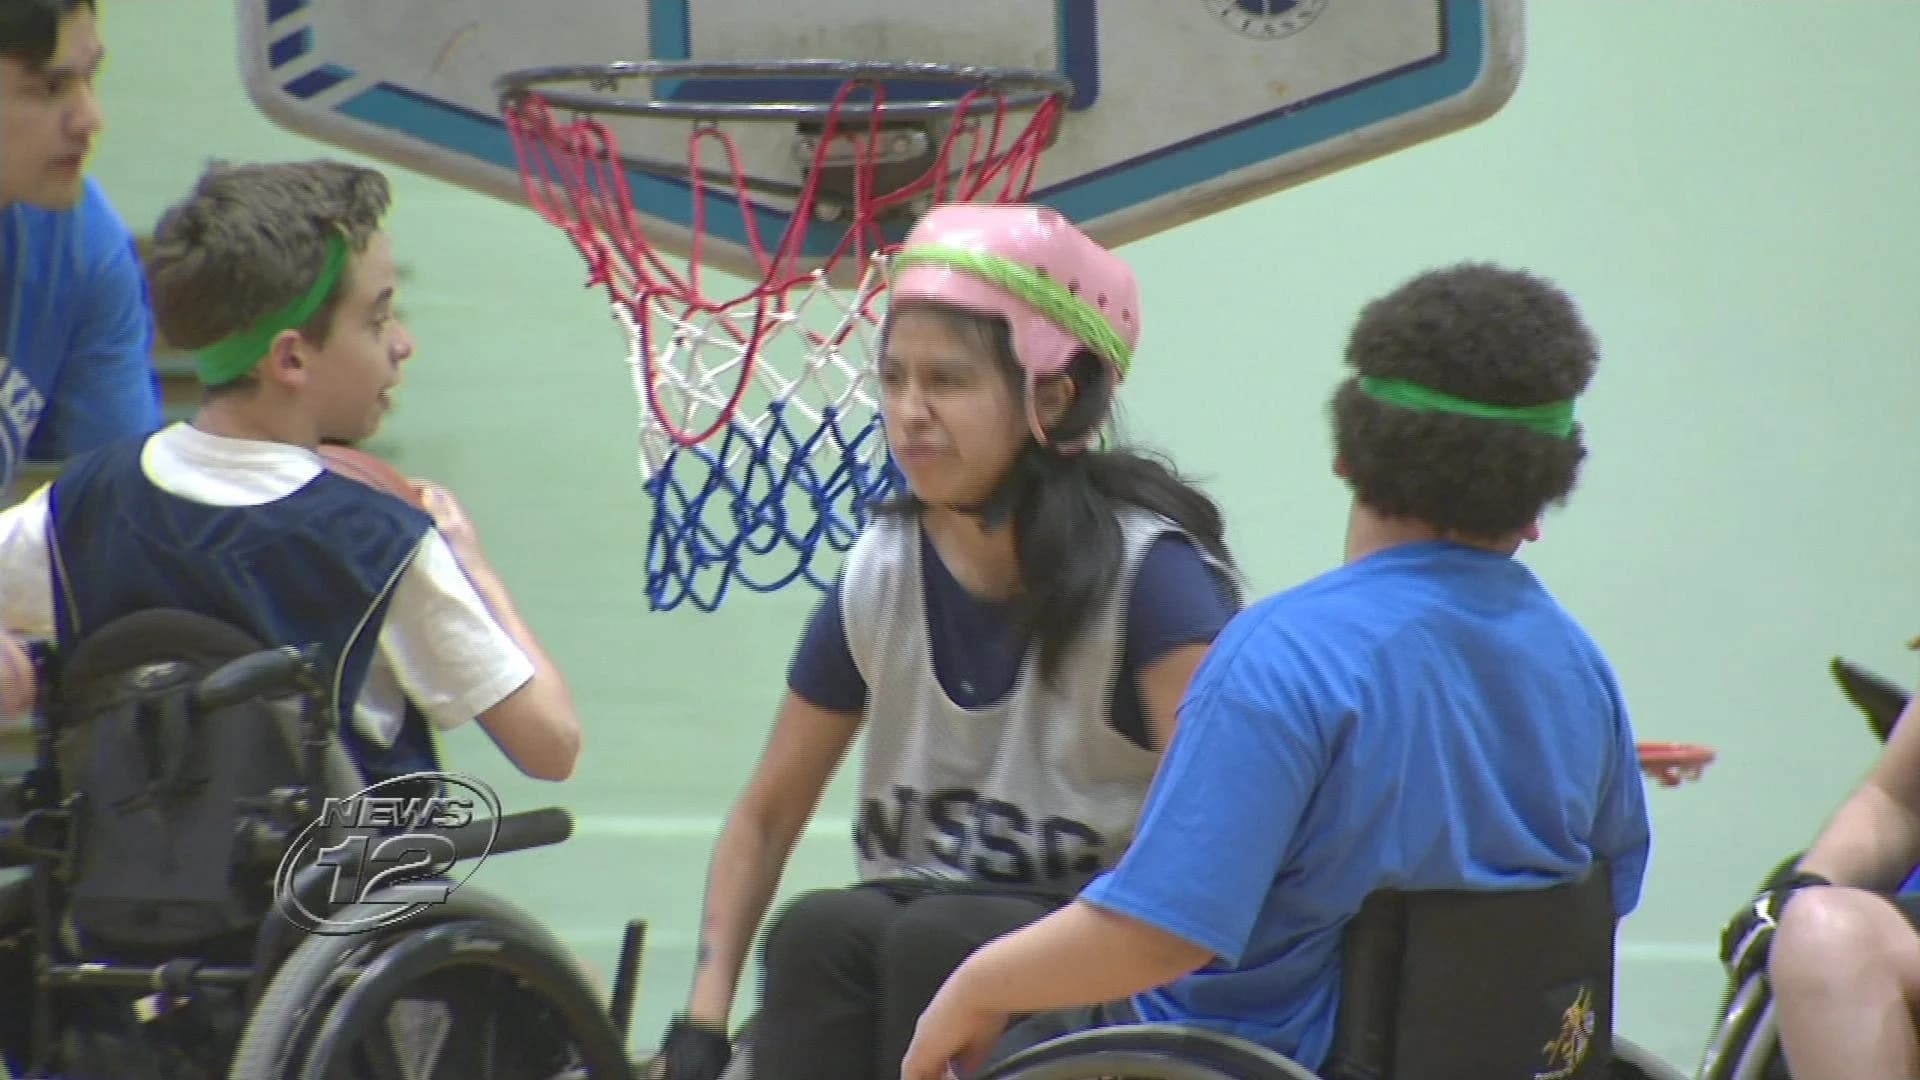 WC County Center hosts 10th wheelchair basketball tournament